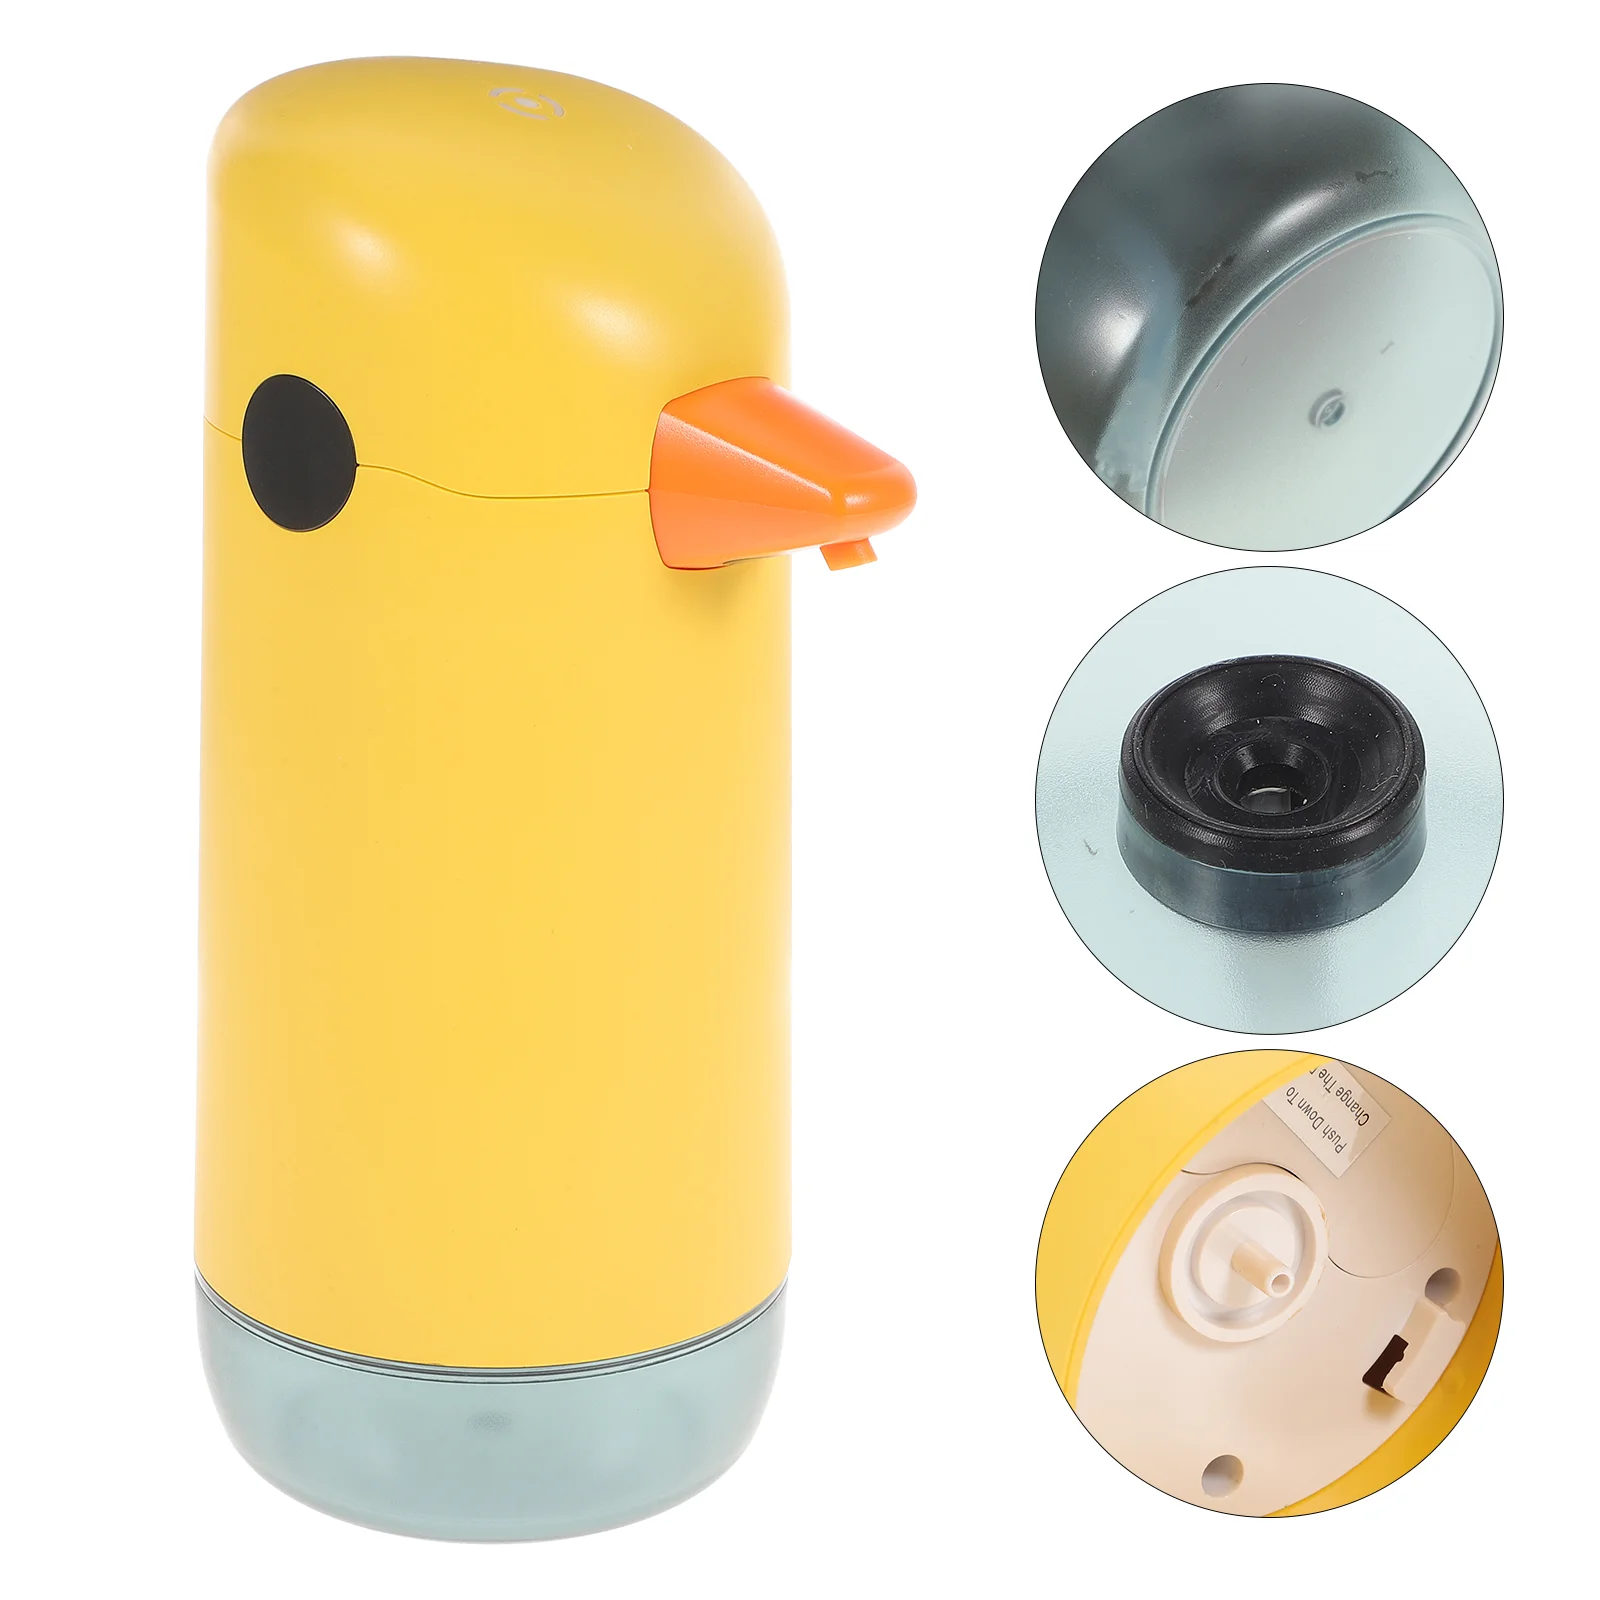 

Wall Mounted Soap Dispenser Automatic Cartoon Foams Foaming Hand Dispensers Yellow Duck 19X8.5CM Abs Child